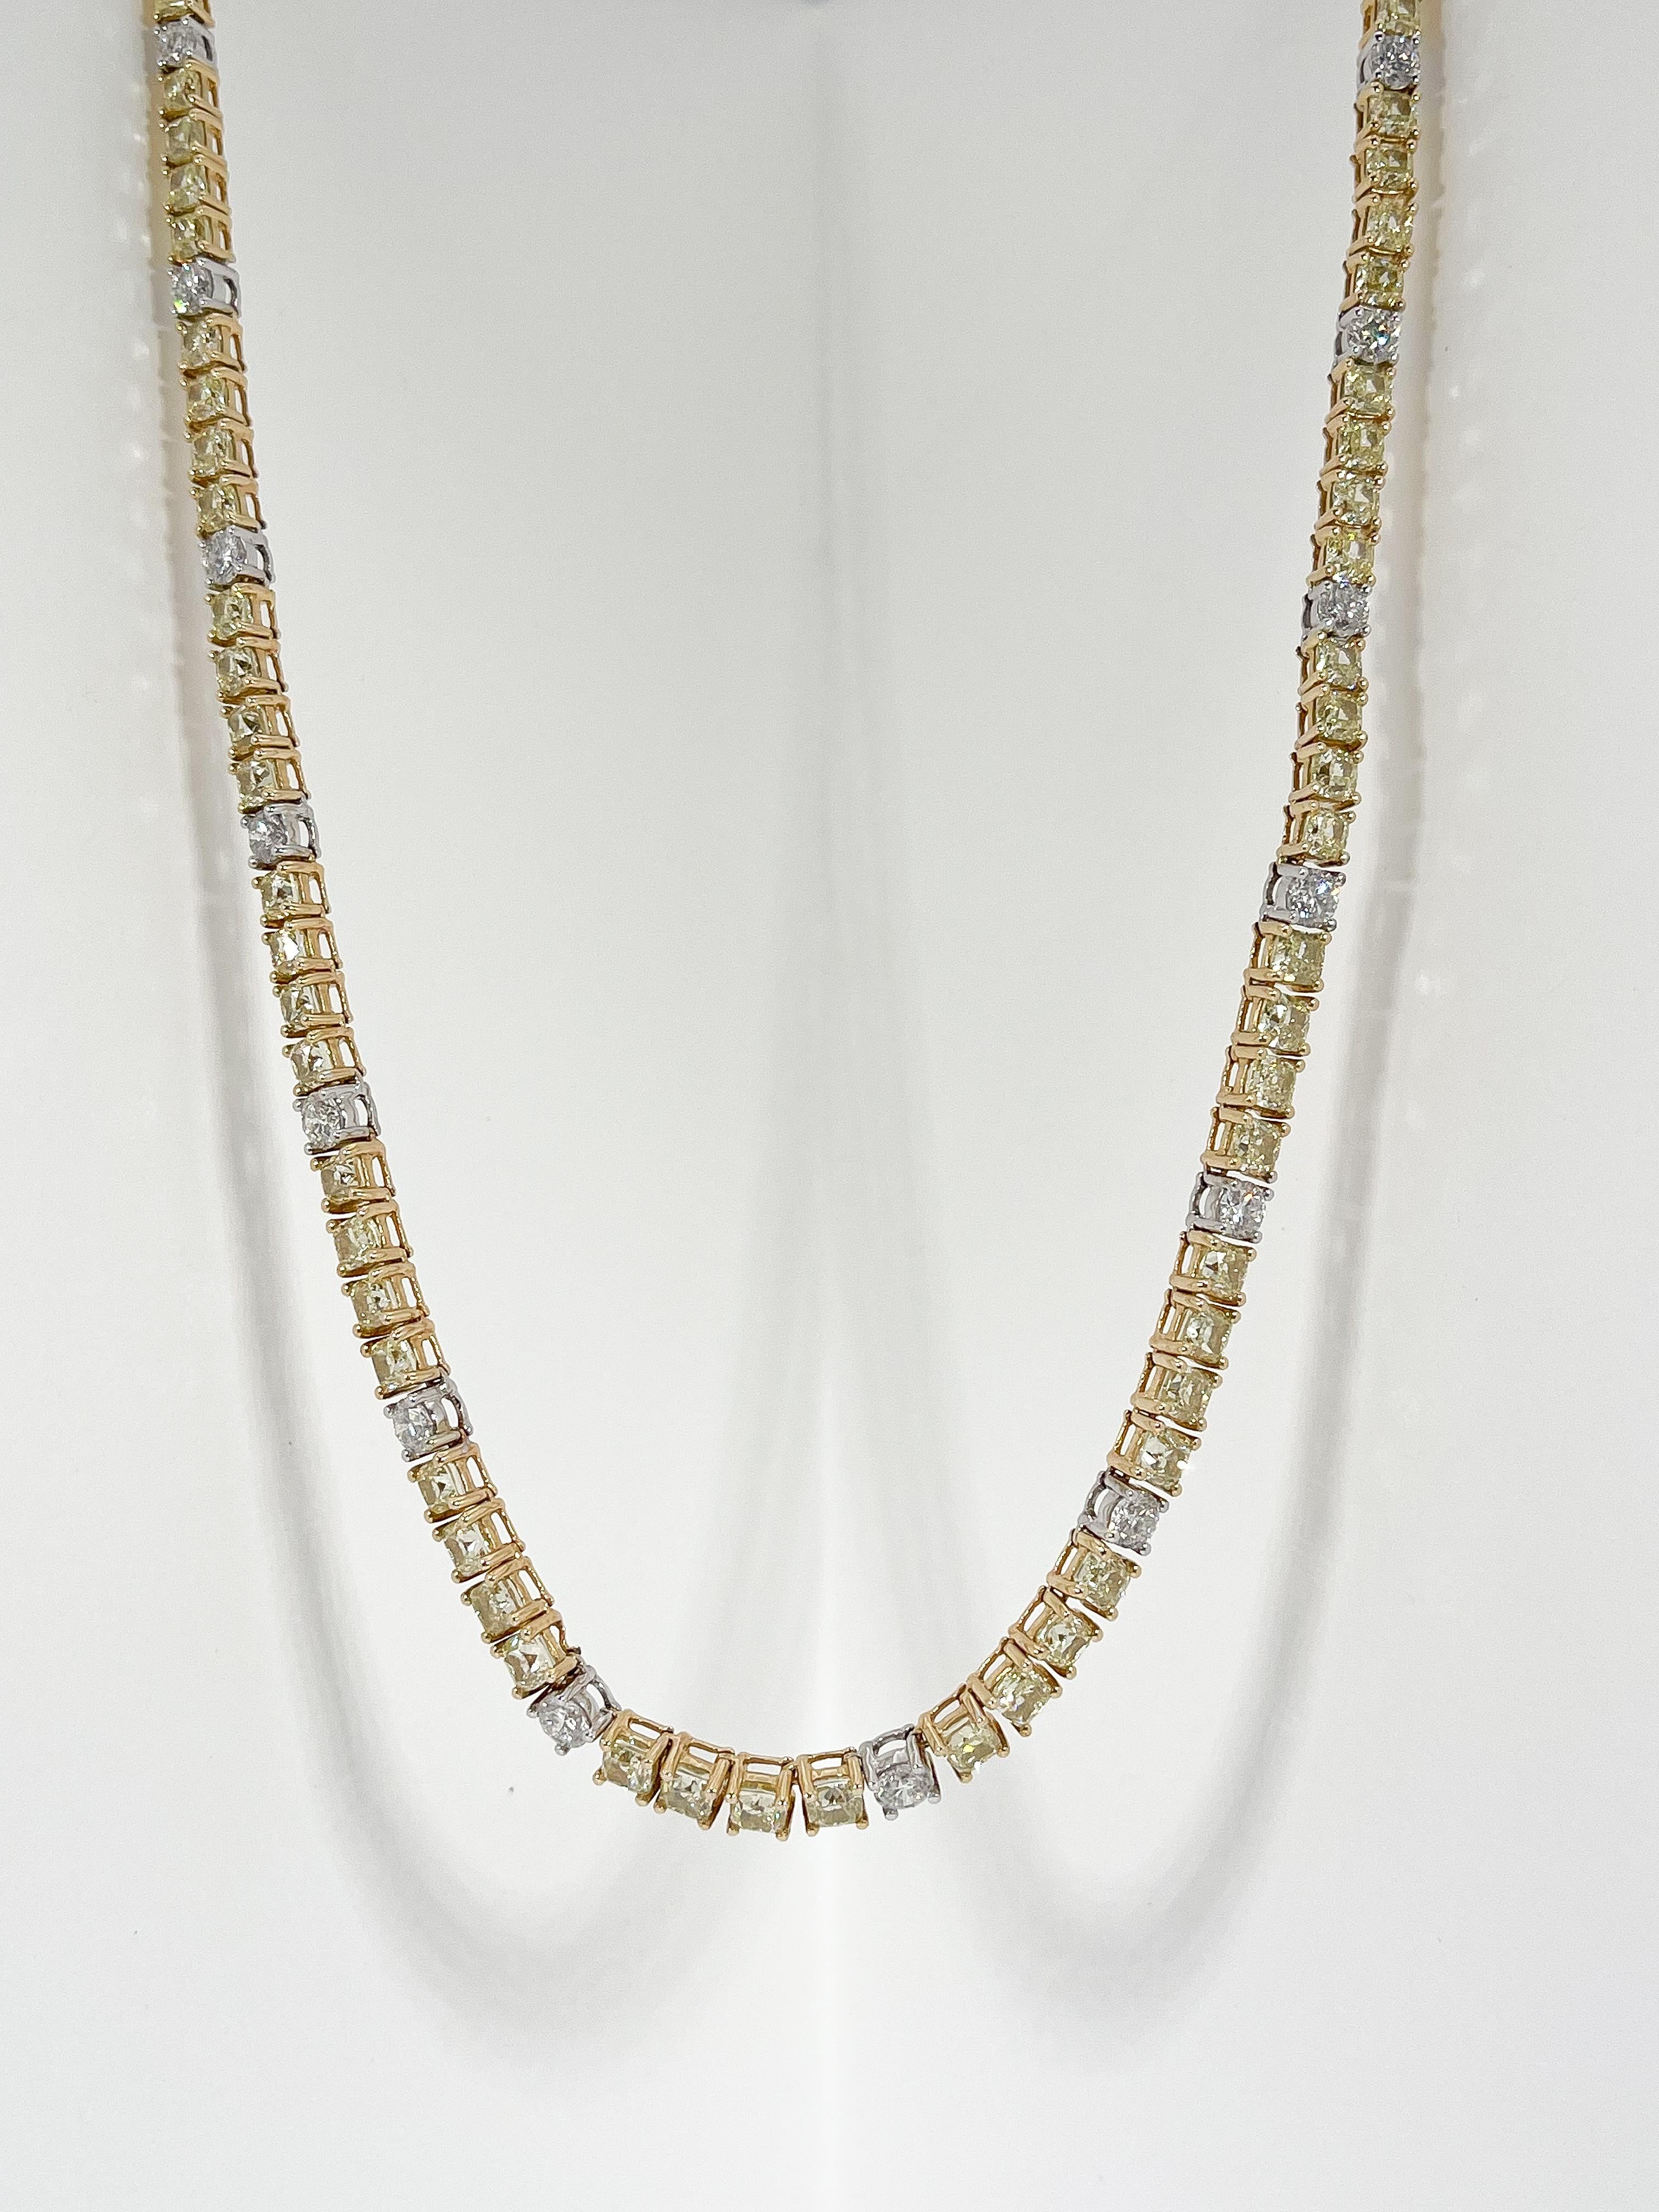 Ladies 14k yellow and white gold graduated Riviere style necklace prong set with yellow cushion brilliant cut diamonds and near colorless round brilliant cut diamonds. The necklace measures 18 inches long by 3mm-5mm wide and is finished with a box